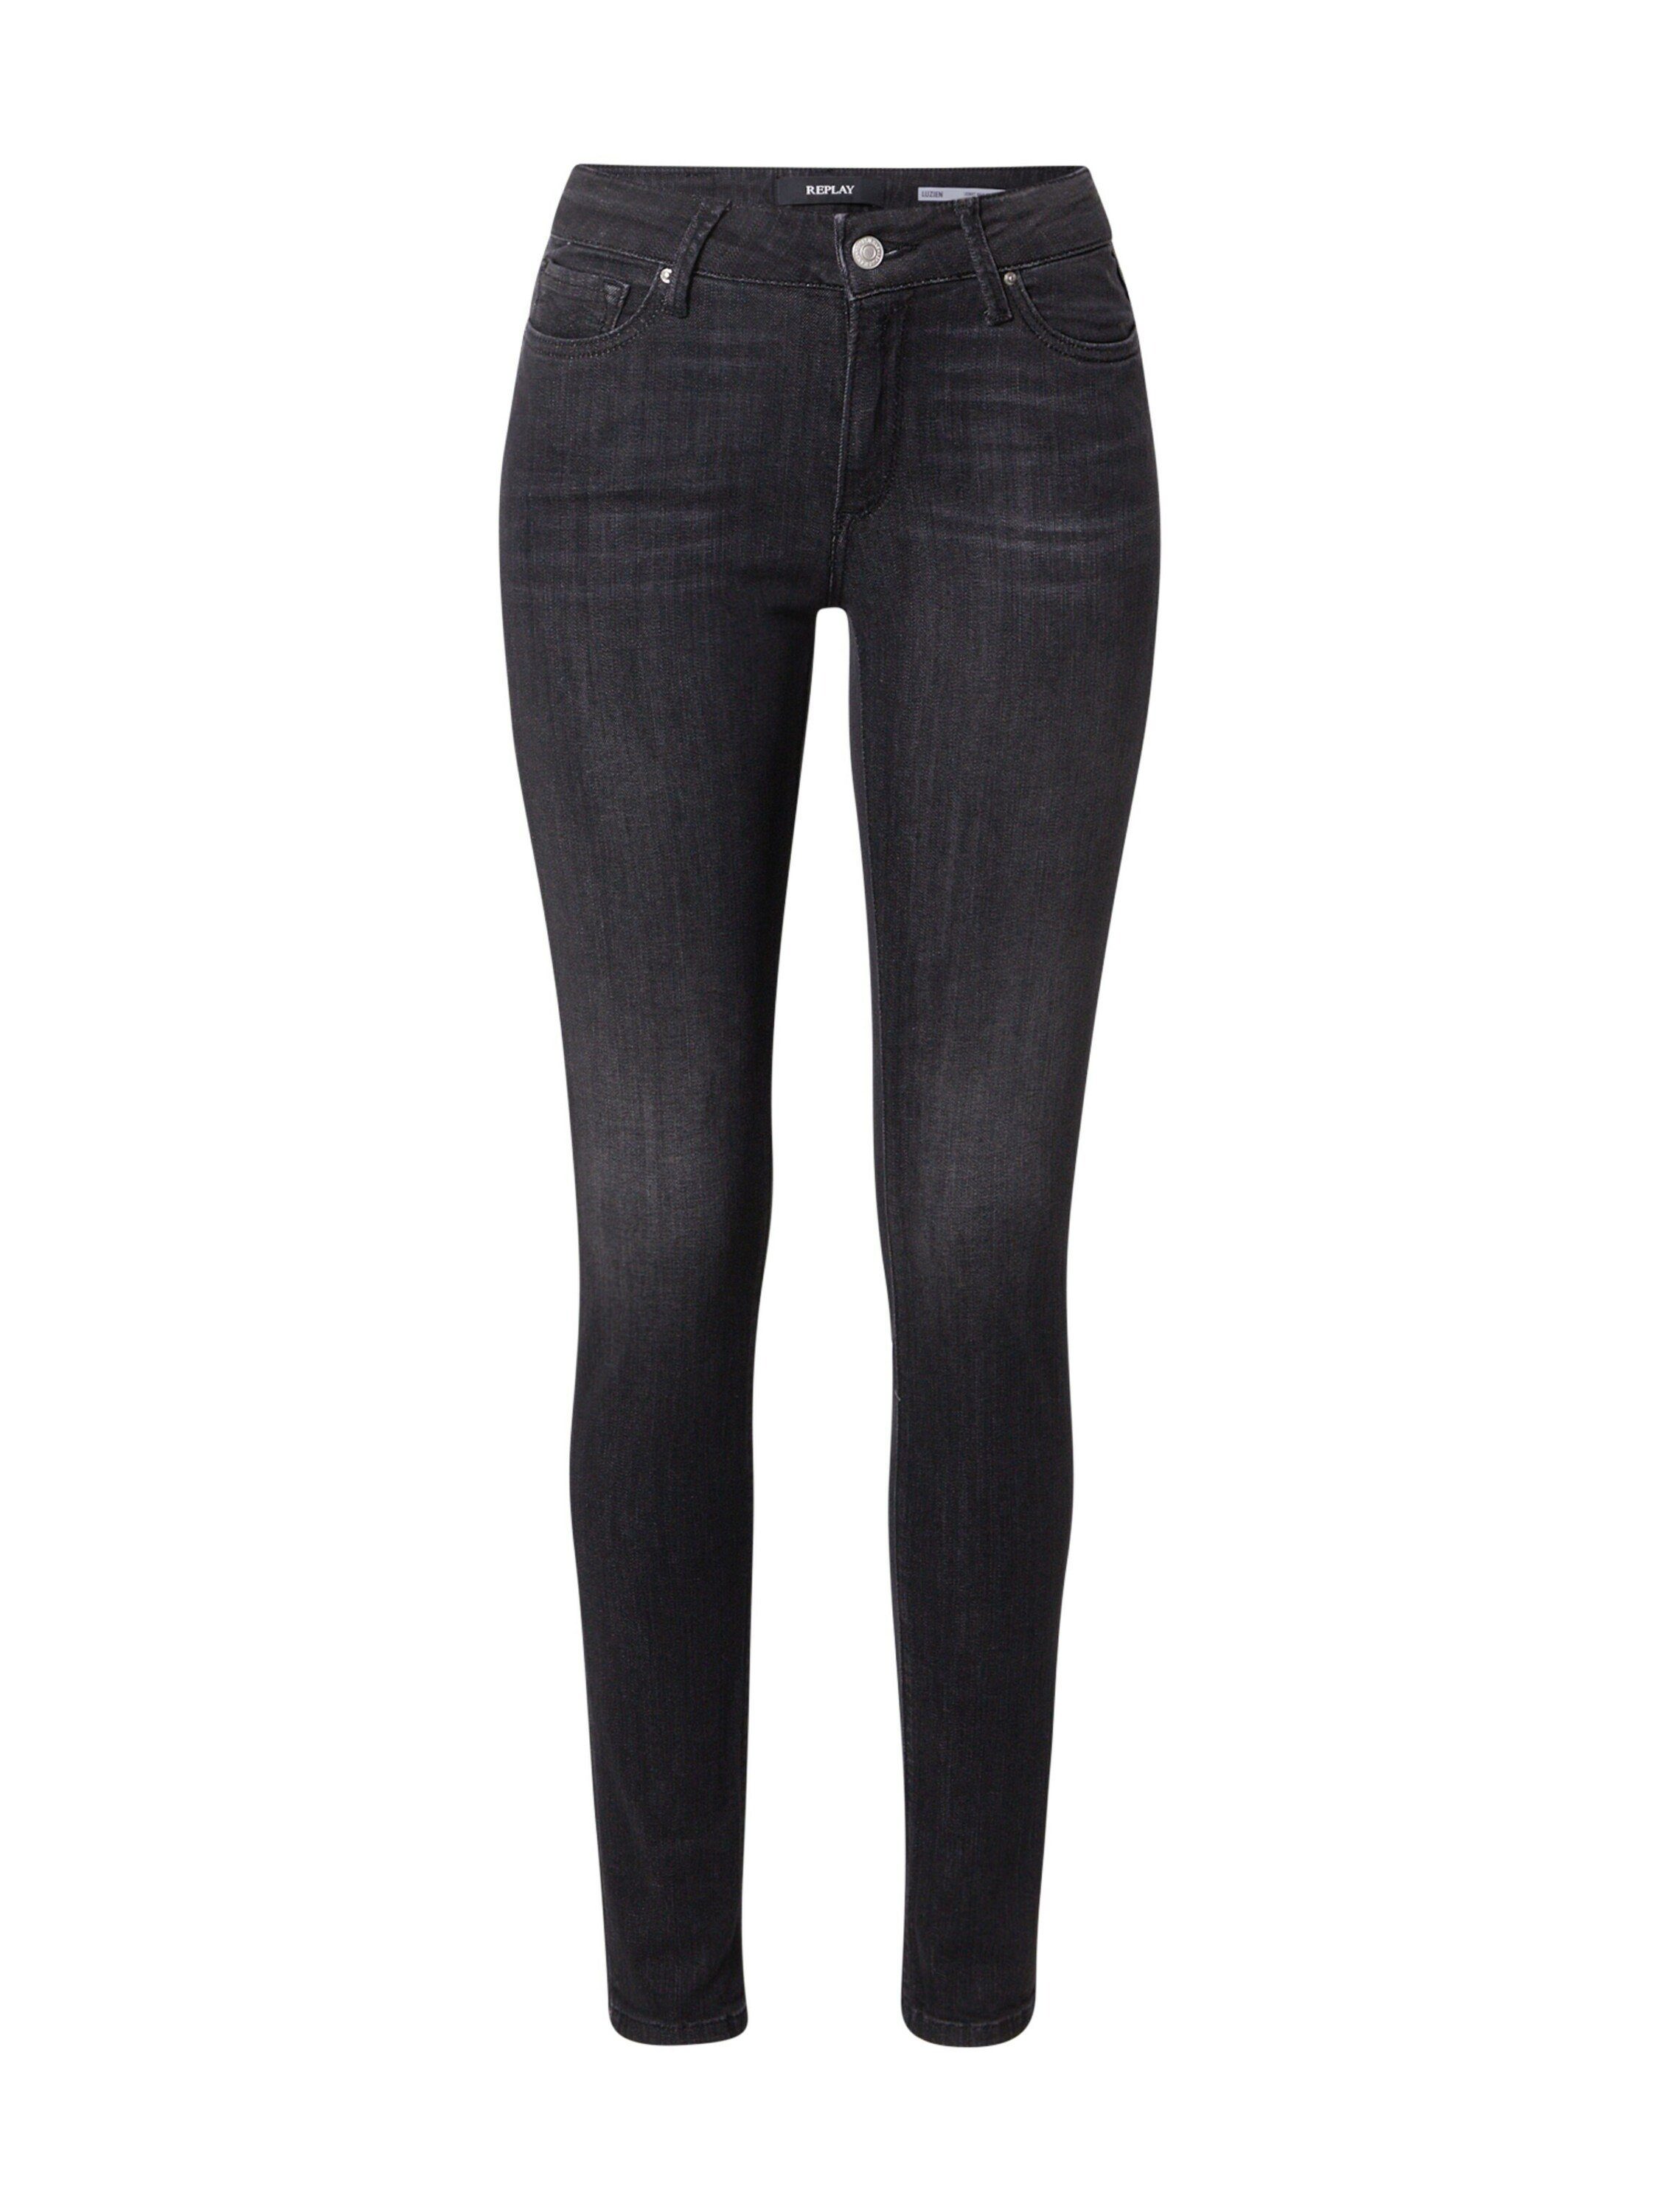 Replay Skinny Fit Jeans 1 Tlg Weiteres Detail Abgesteppter Saumkante